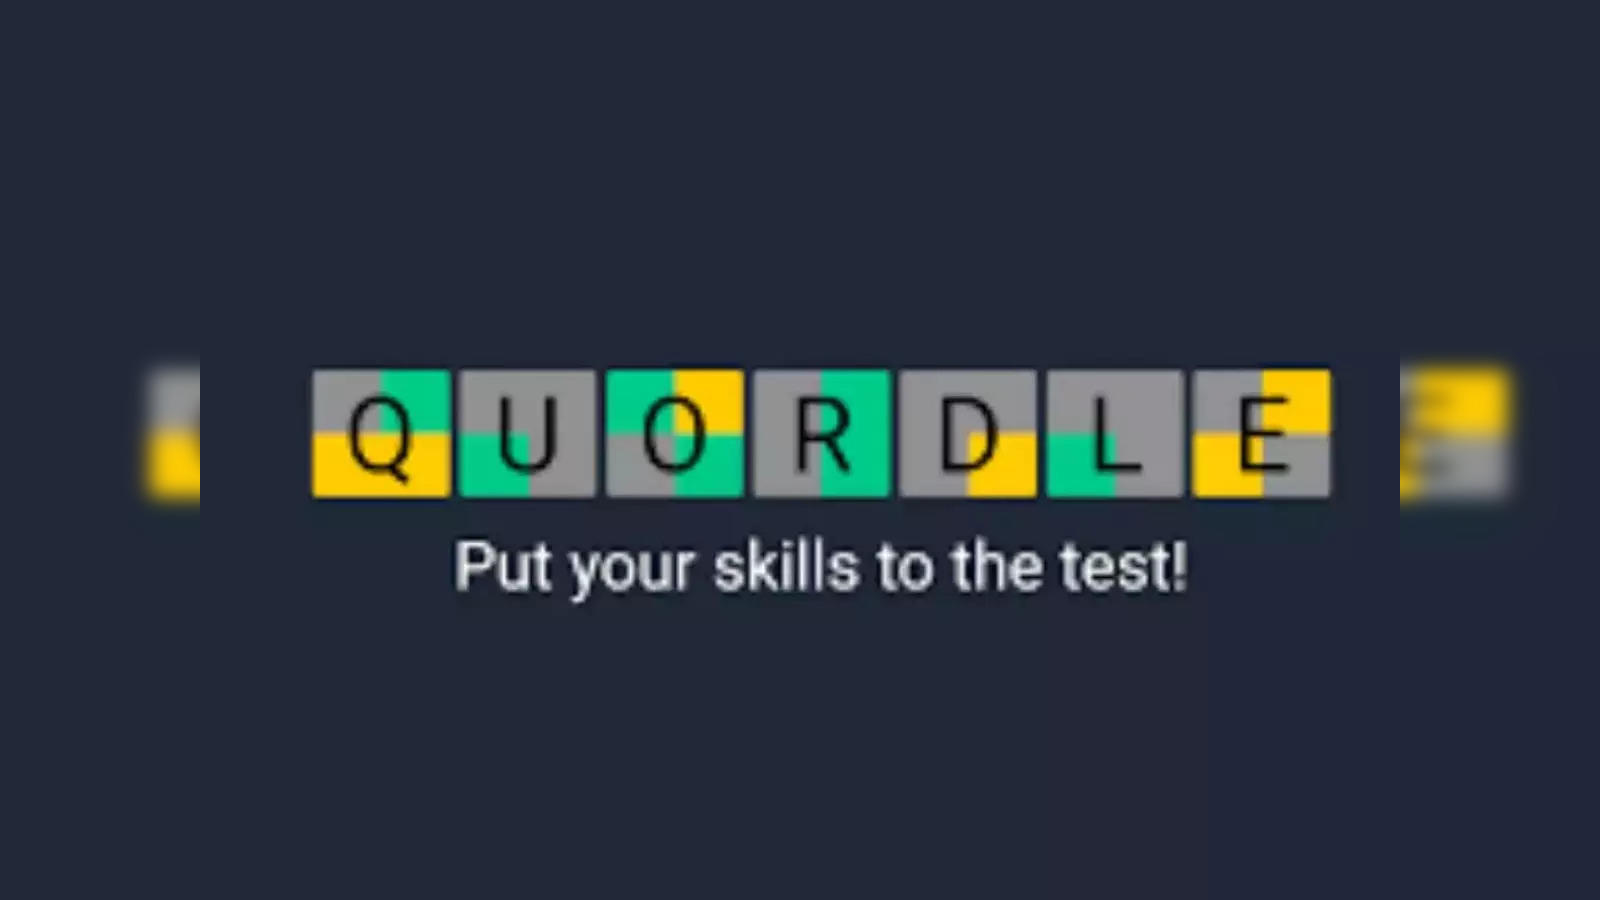 Play 8 simultaneous Wordle puzzles in Octordle